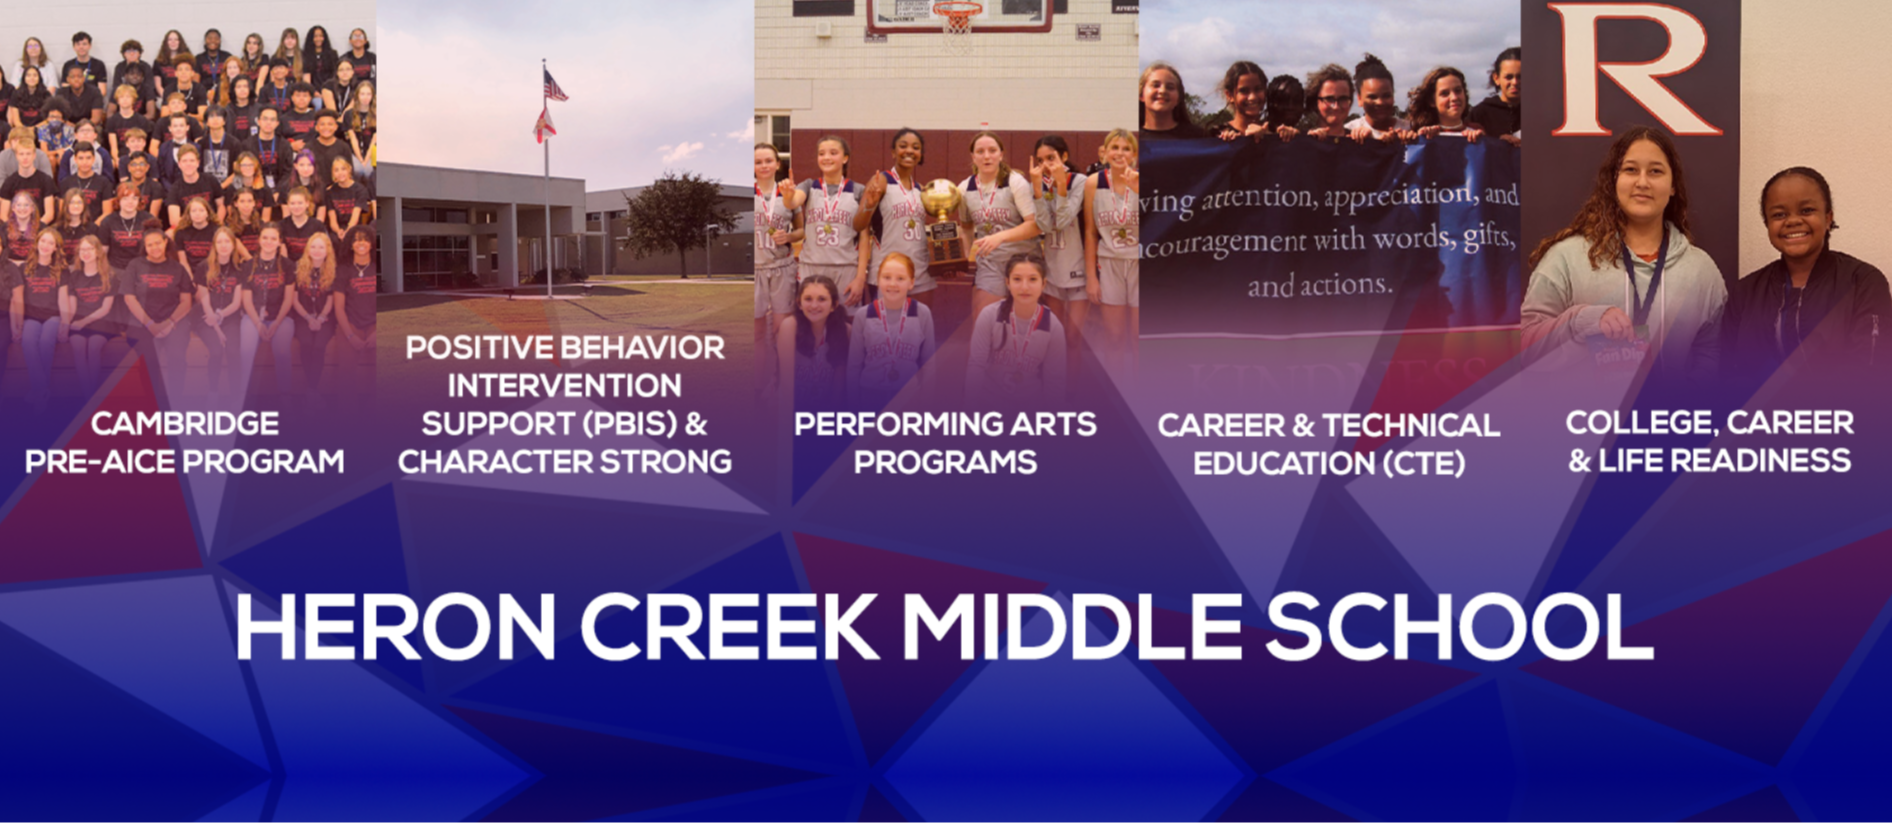 Image of a the programs that Heron Creek middle school promotes  cambridge pre-aice program, positive behavior intervention support (PBIS) & character strong, performing arts programs, career & technical education (CTE), College, Career & life readiness